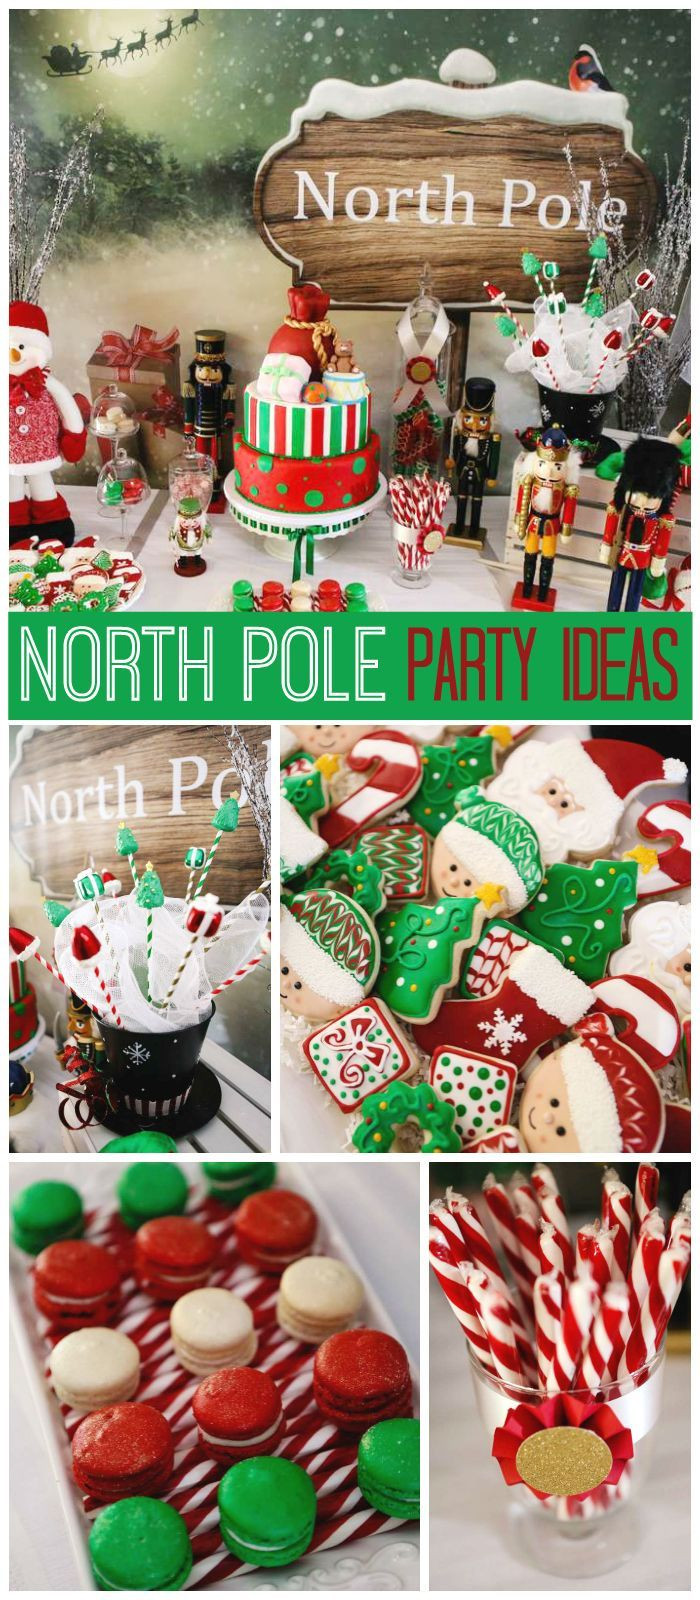 Christmas In July Pool Party Ideas
 Pin by Kendra Goodrich